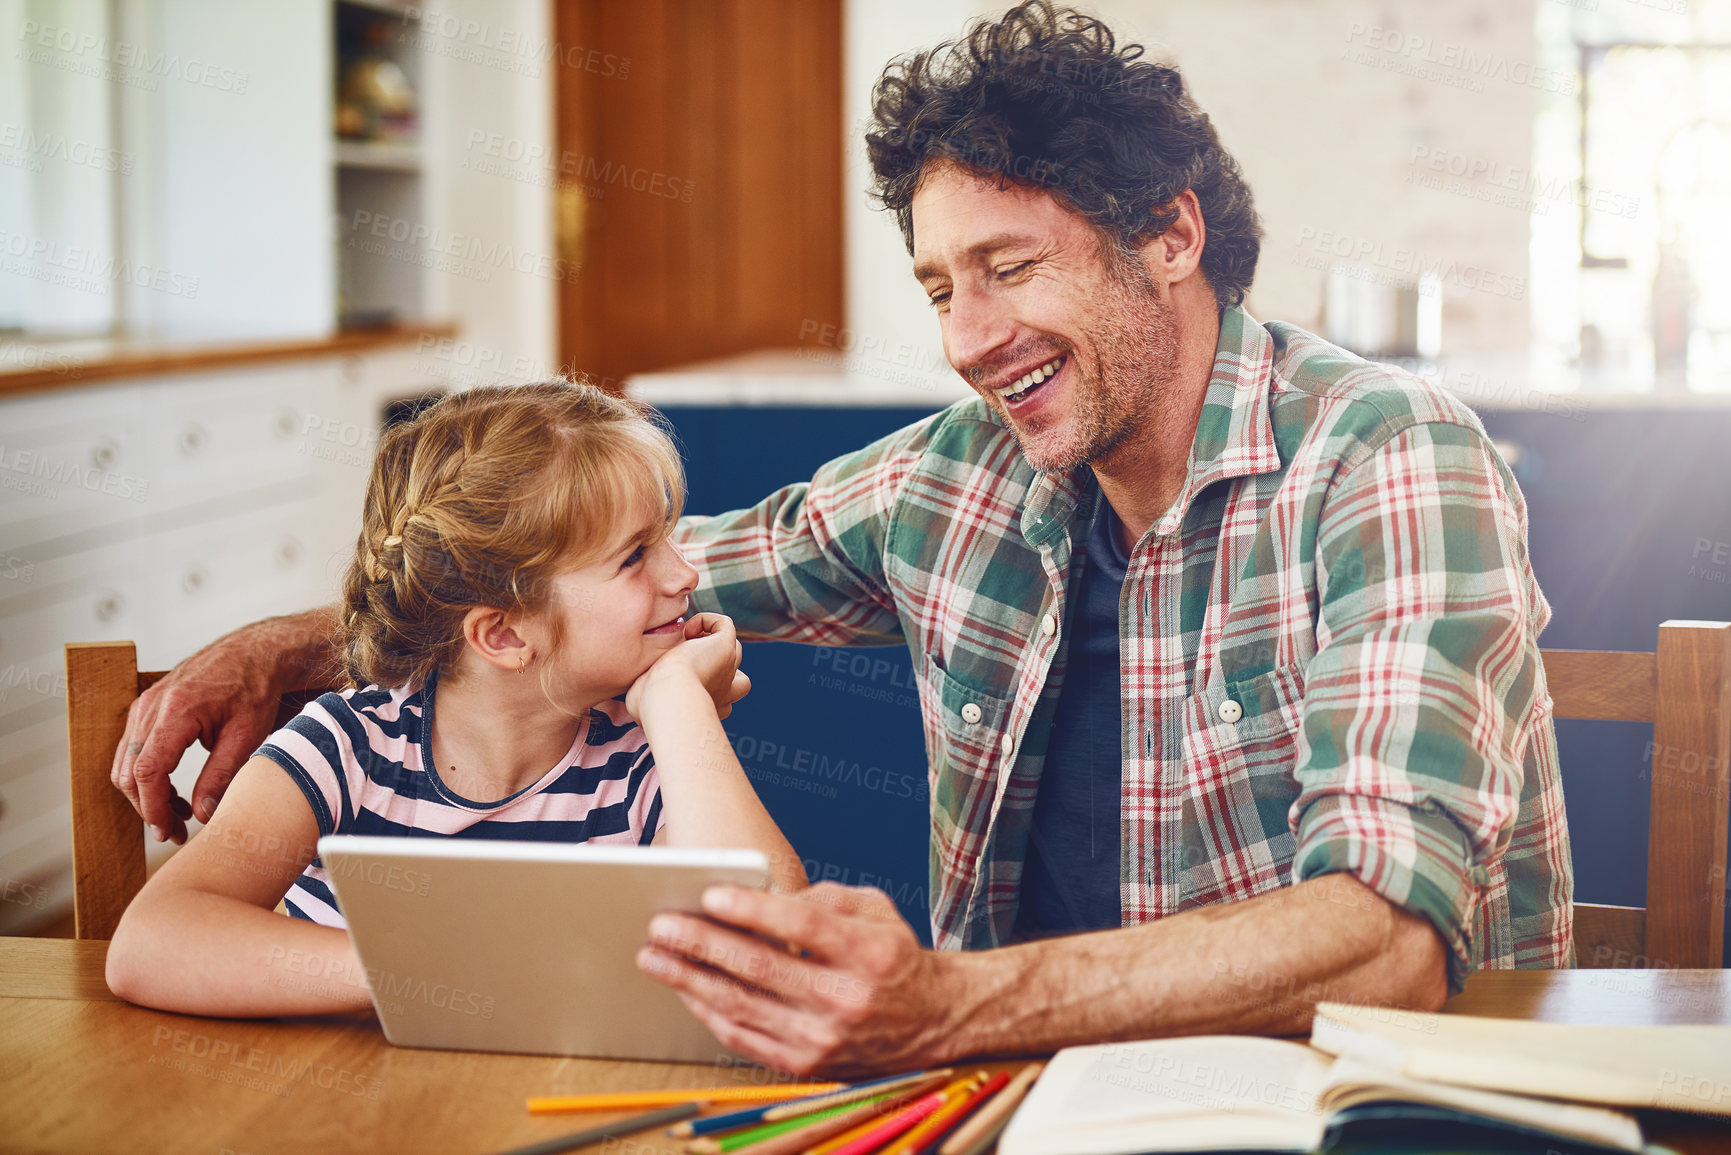 Buy stock photo Cropped shot of a father helping his daughter complete her homework on a digital tablet